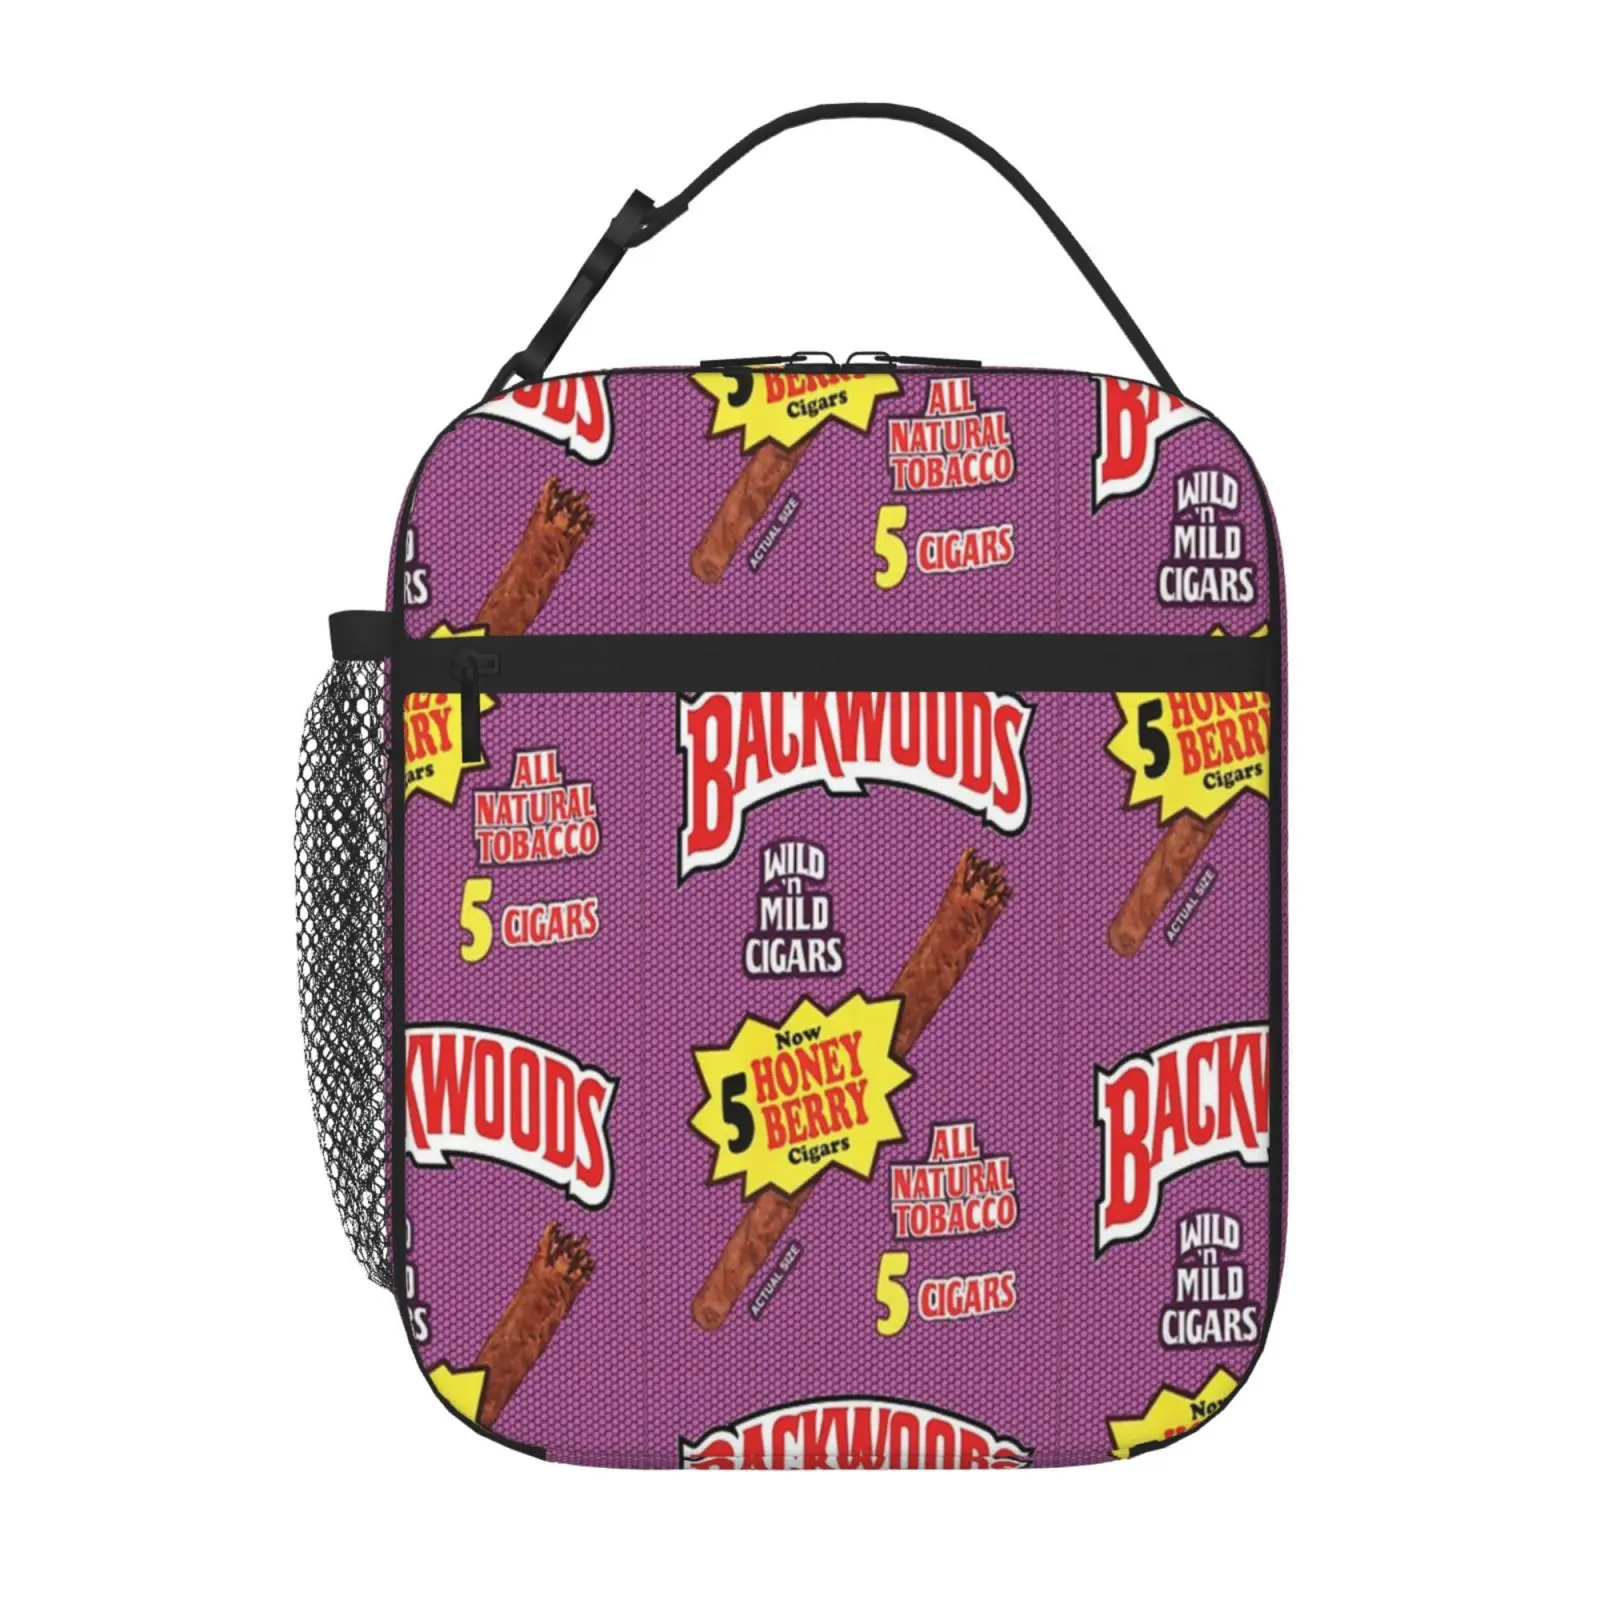 

Backwoods Honey Berry Cigar Leafs Lunch Box Cooler Bags Insulated Lunch Box Lunch Box For Women